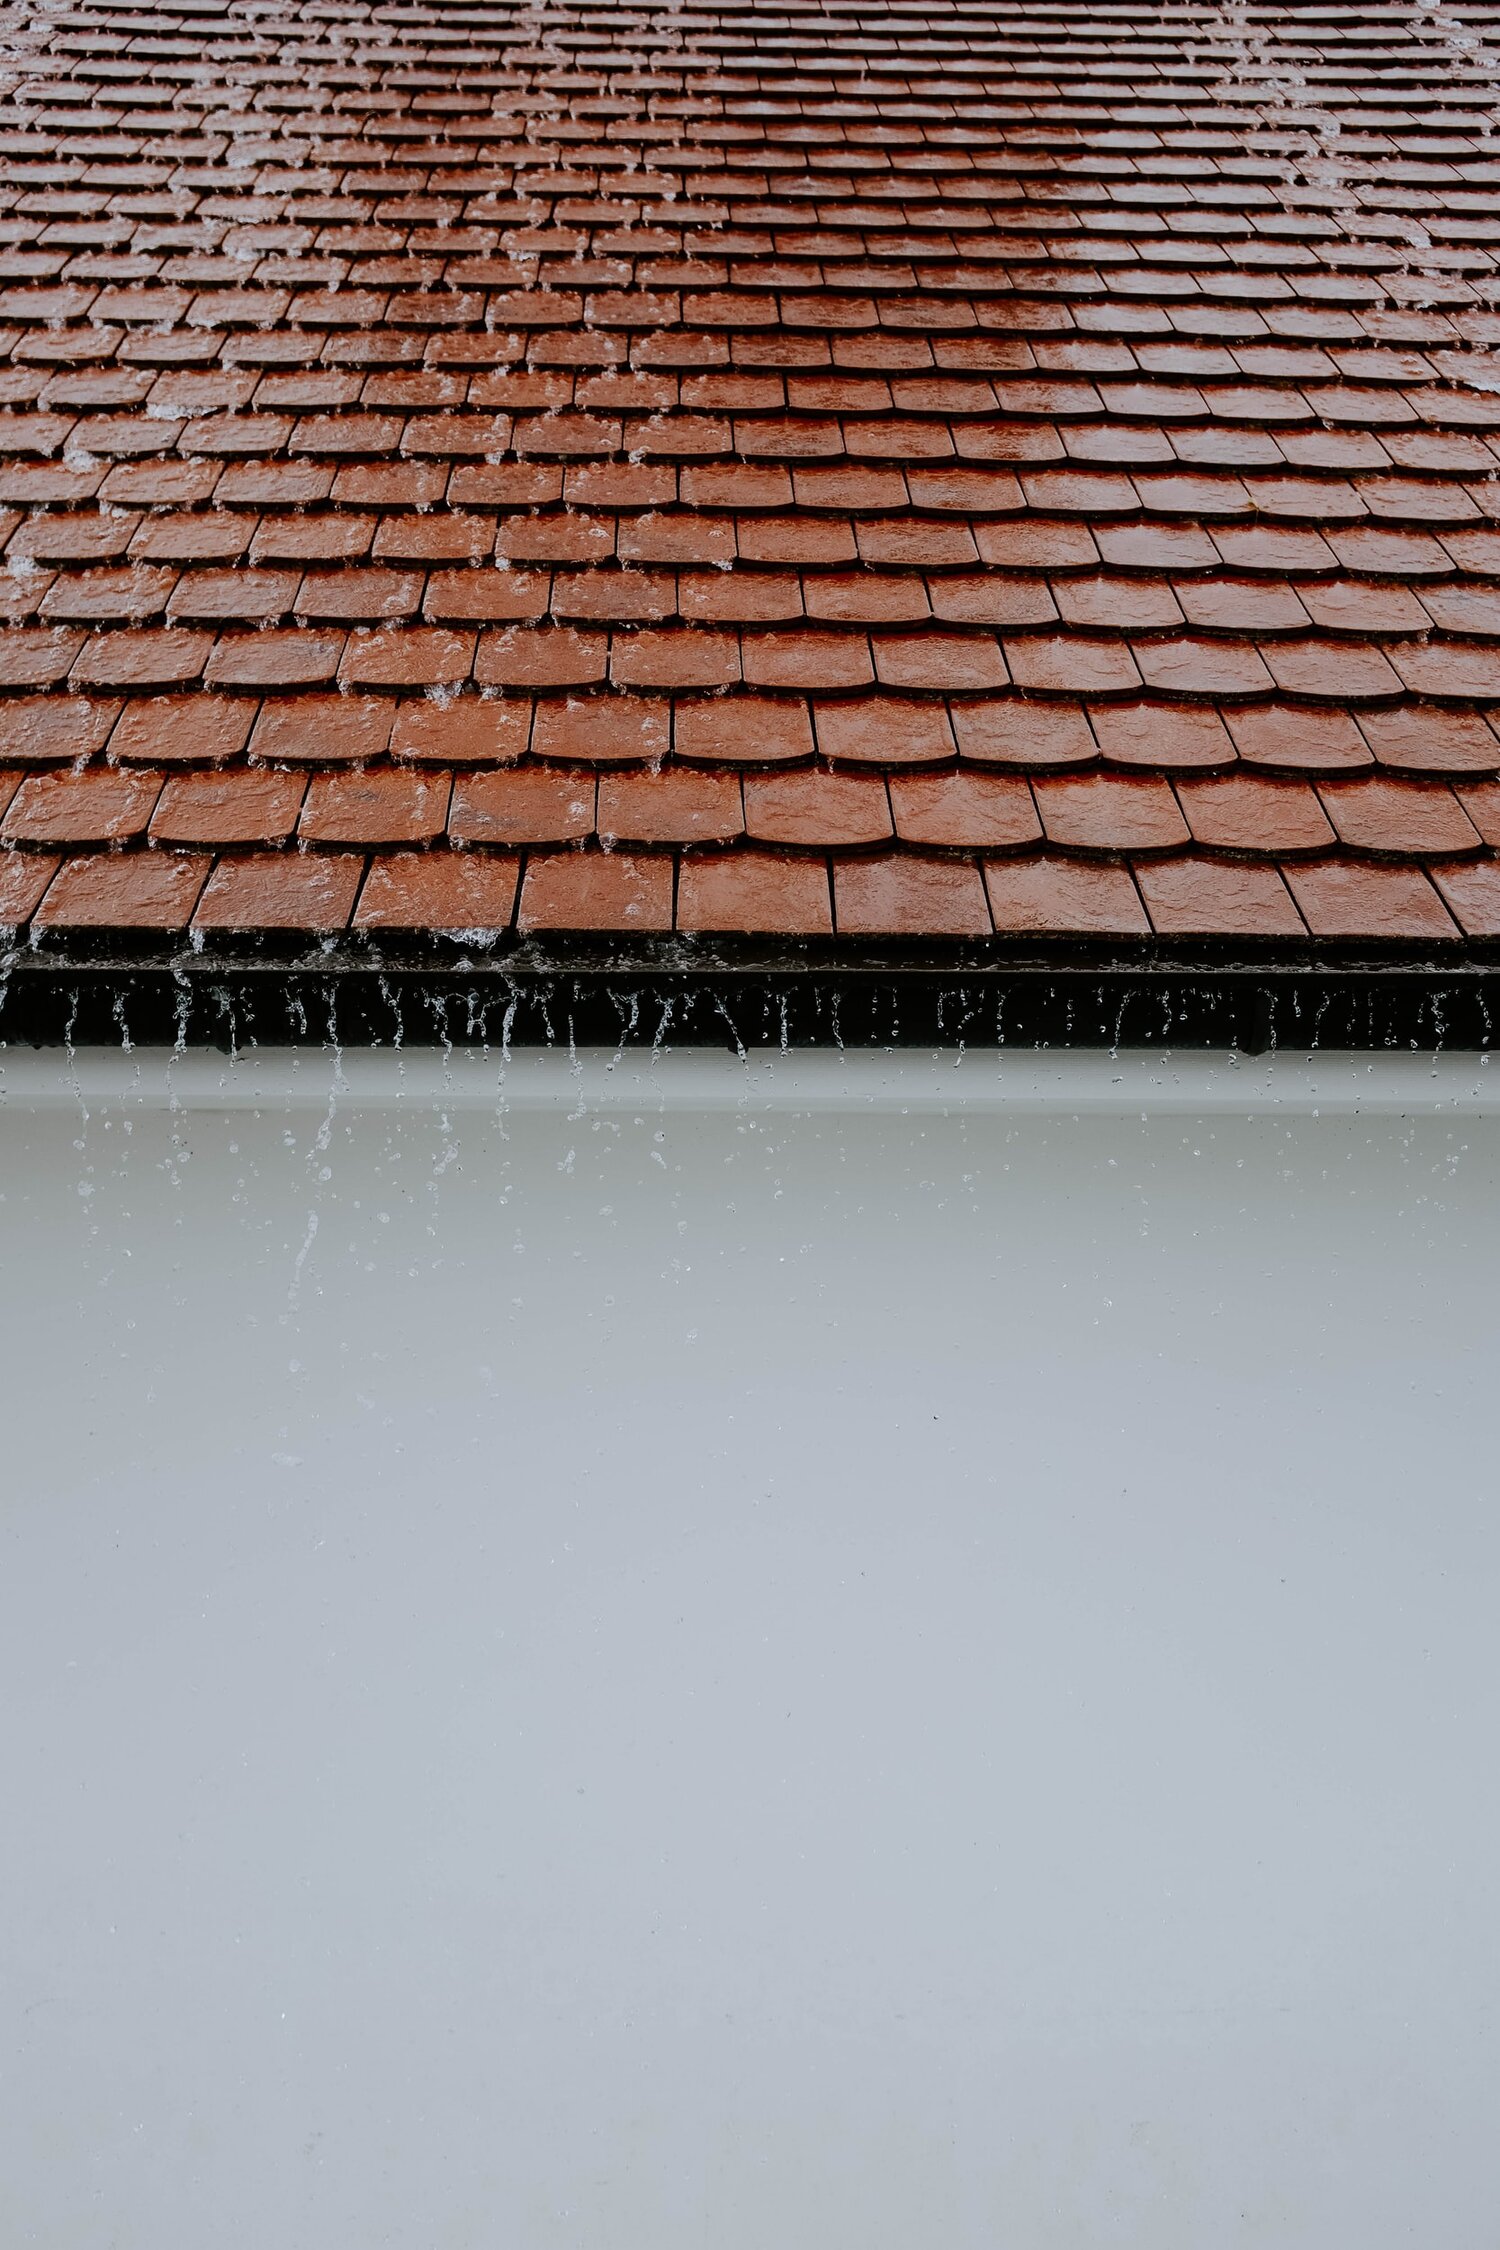 Controlling water drainage to prevent damage in old homes